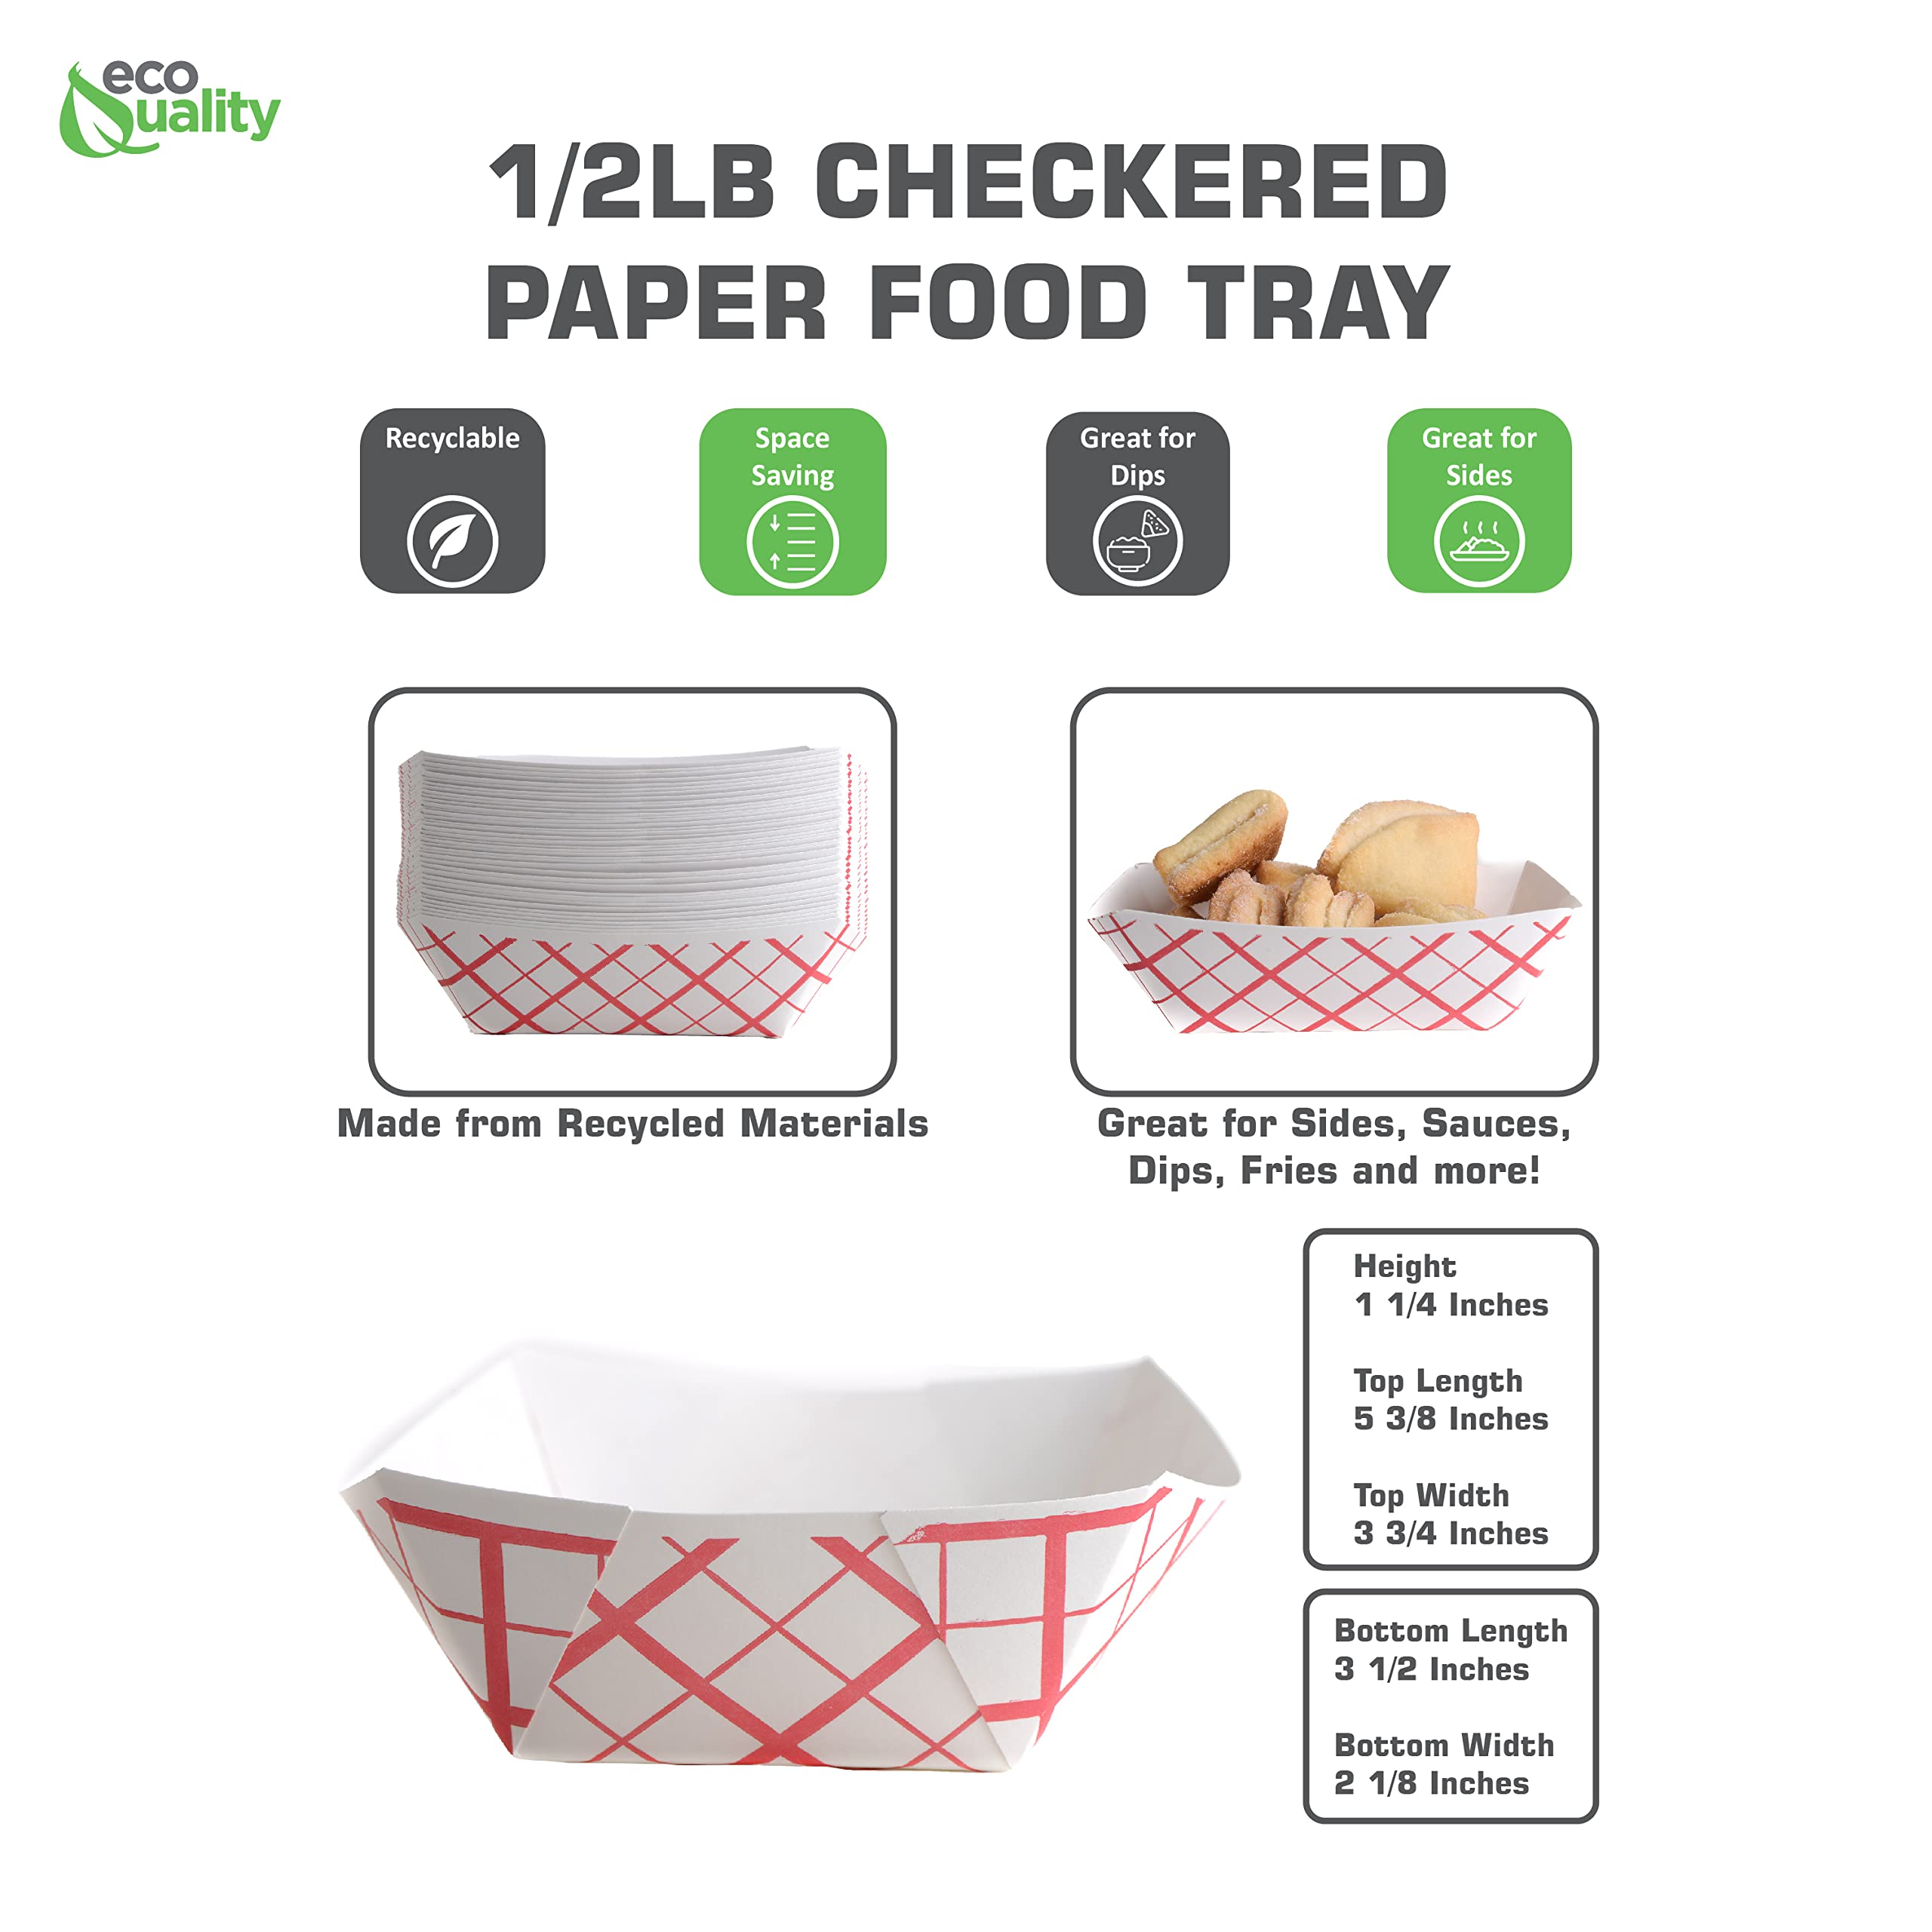 50ct Disposable Paper Food Tray (1/2 LB) - Red Check Food Tray, USA MADE, Recyclable, Biodegradable, Compostable, Great for Picnics, Carnivals, Party, Camping, BBQ, Restaurants, Fries (0.5lb)